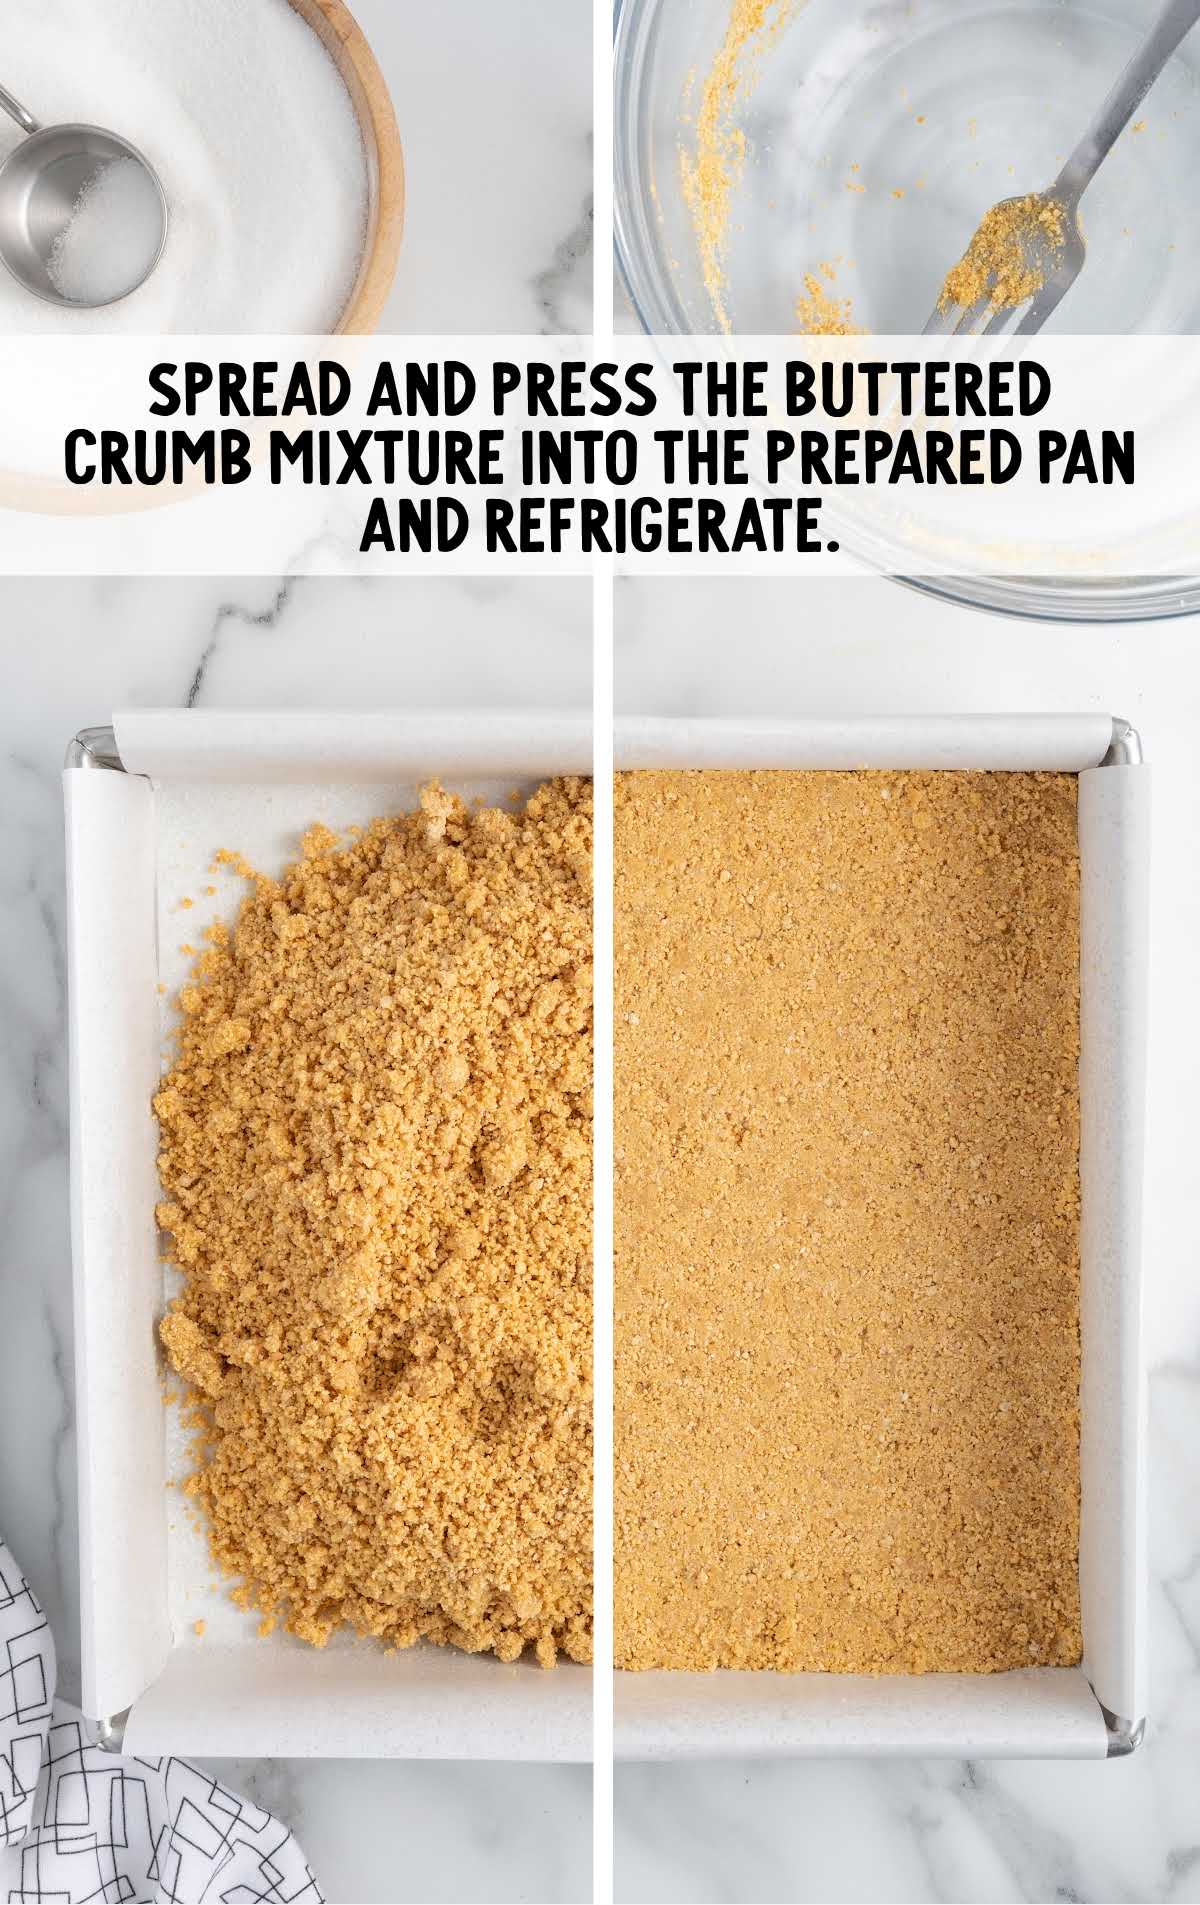 press and spread the buttered crumbs into the pan